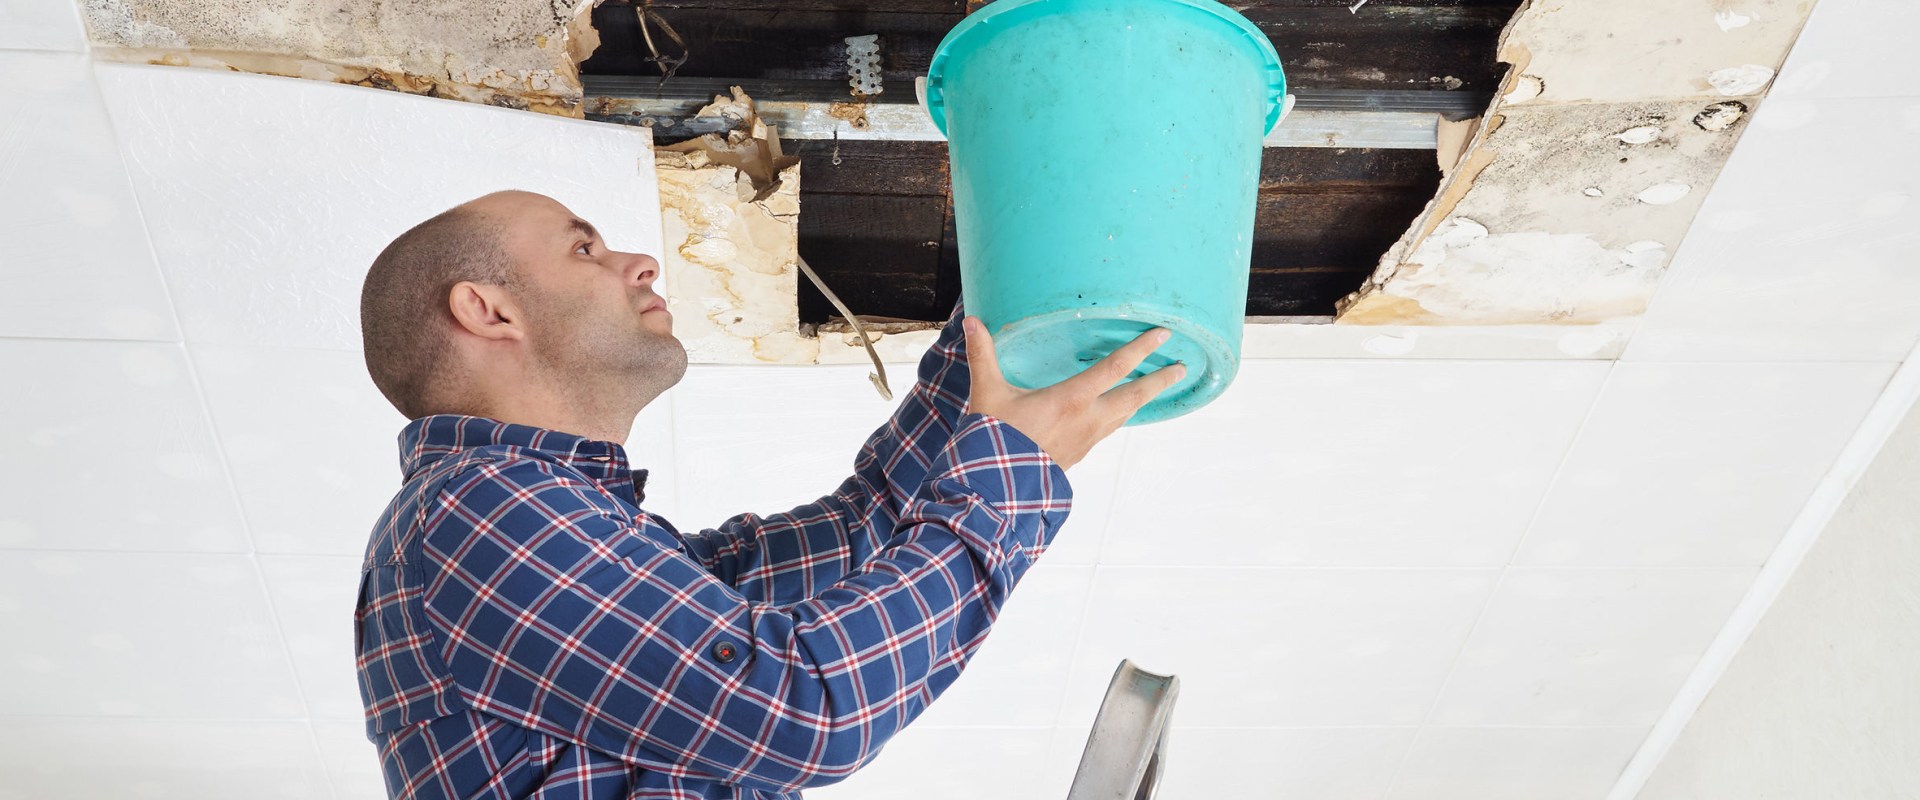 Is Water Damage a Big Deal? - A Comprehensive Guide